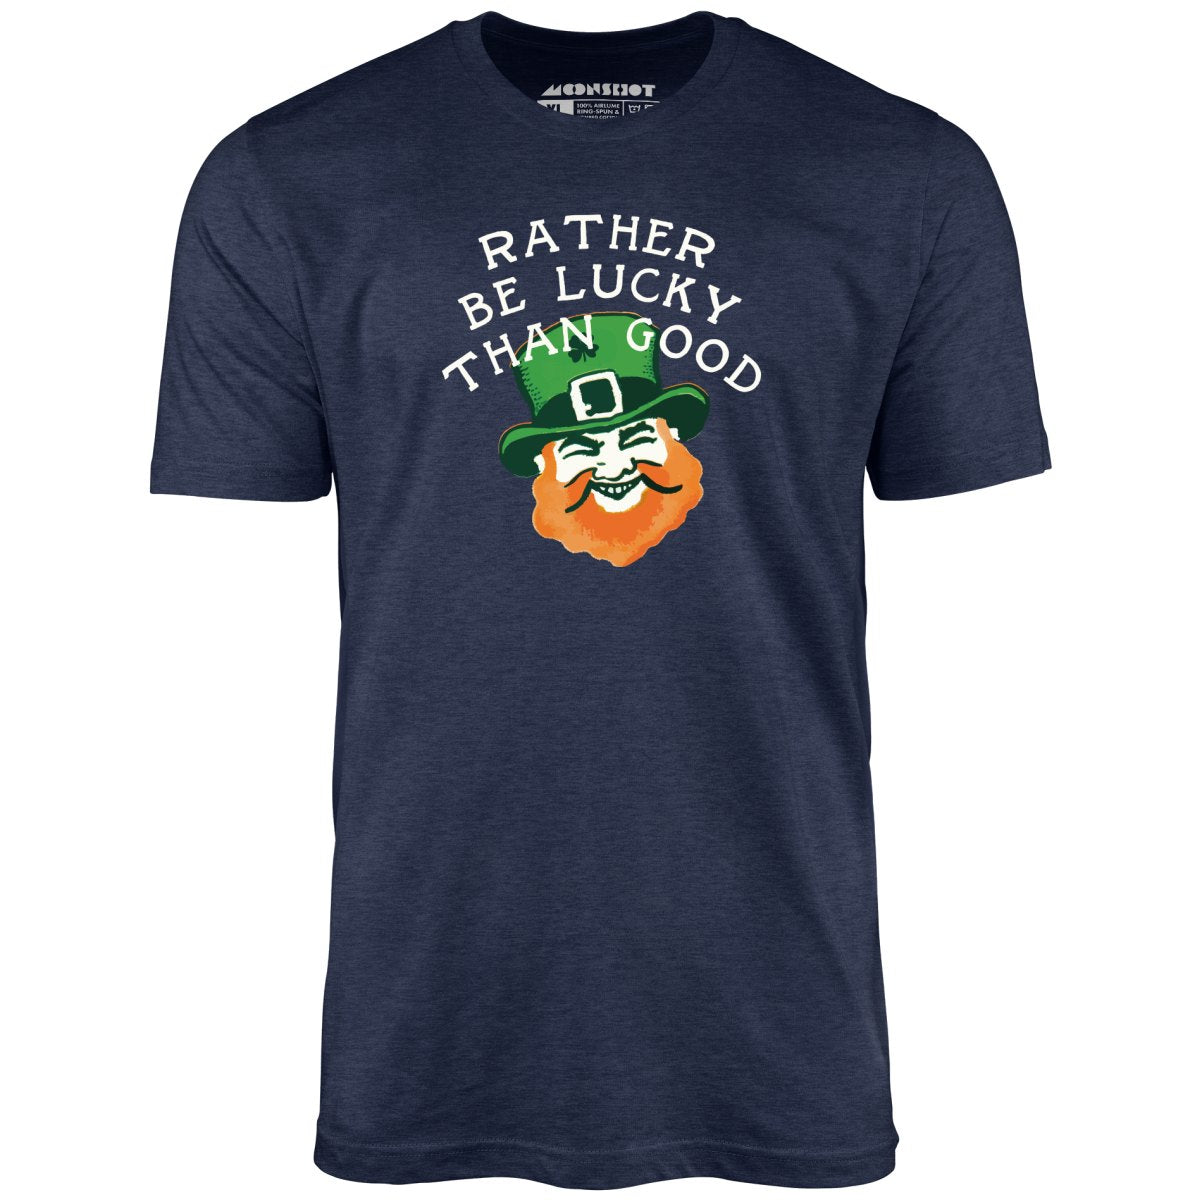 Rather Be Lucky Than Good - Unisex T-Shirt